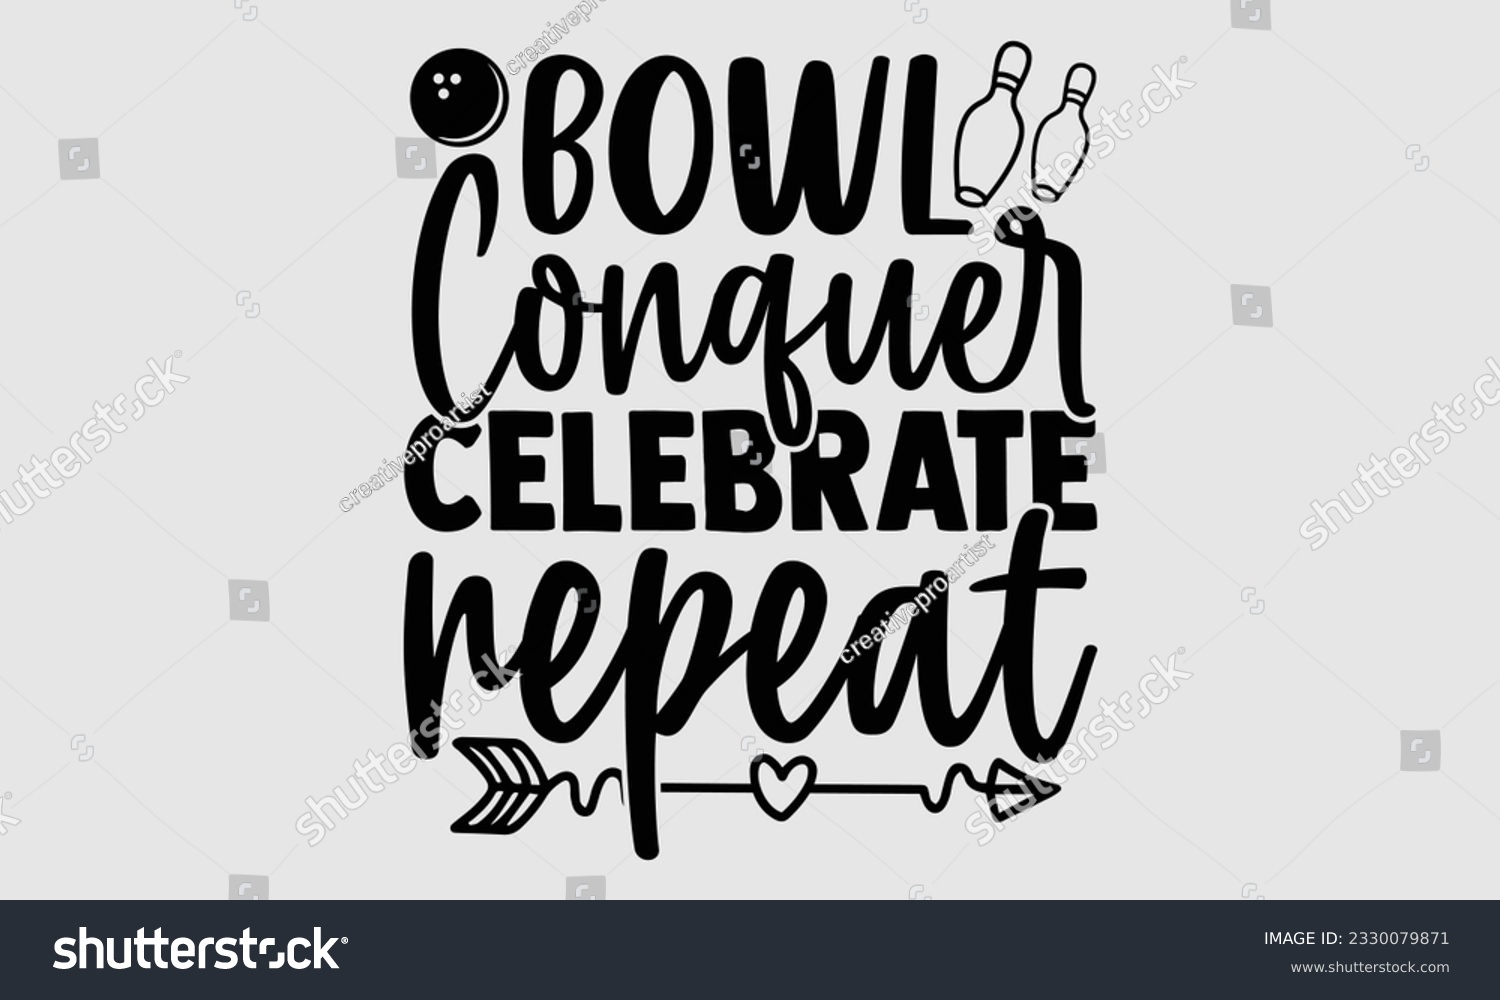 SVG of Bowl Conquer Celebrate Repeat- Bowling t-shirt design, Handmade calligraphy vector Illustration for prints on SVG and bags, posters, greeting card template EPS svg